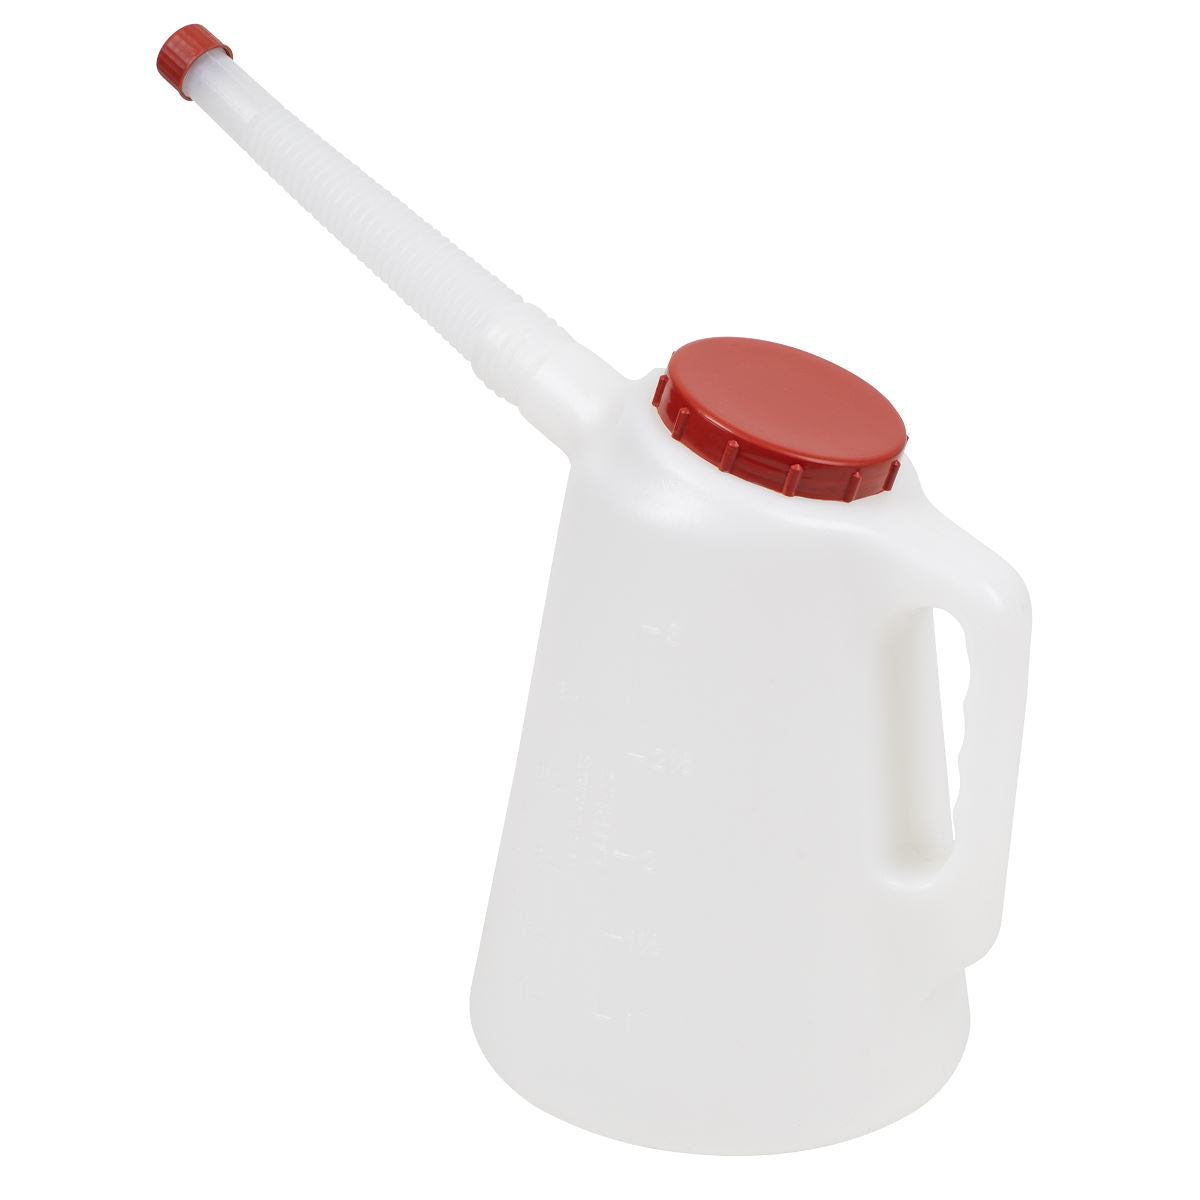 Sealey Oil Container with Flexible Spout 3L - Red Lid